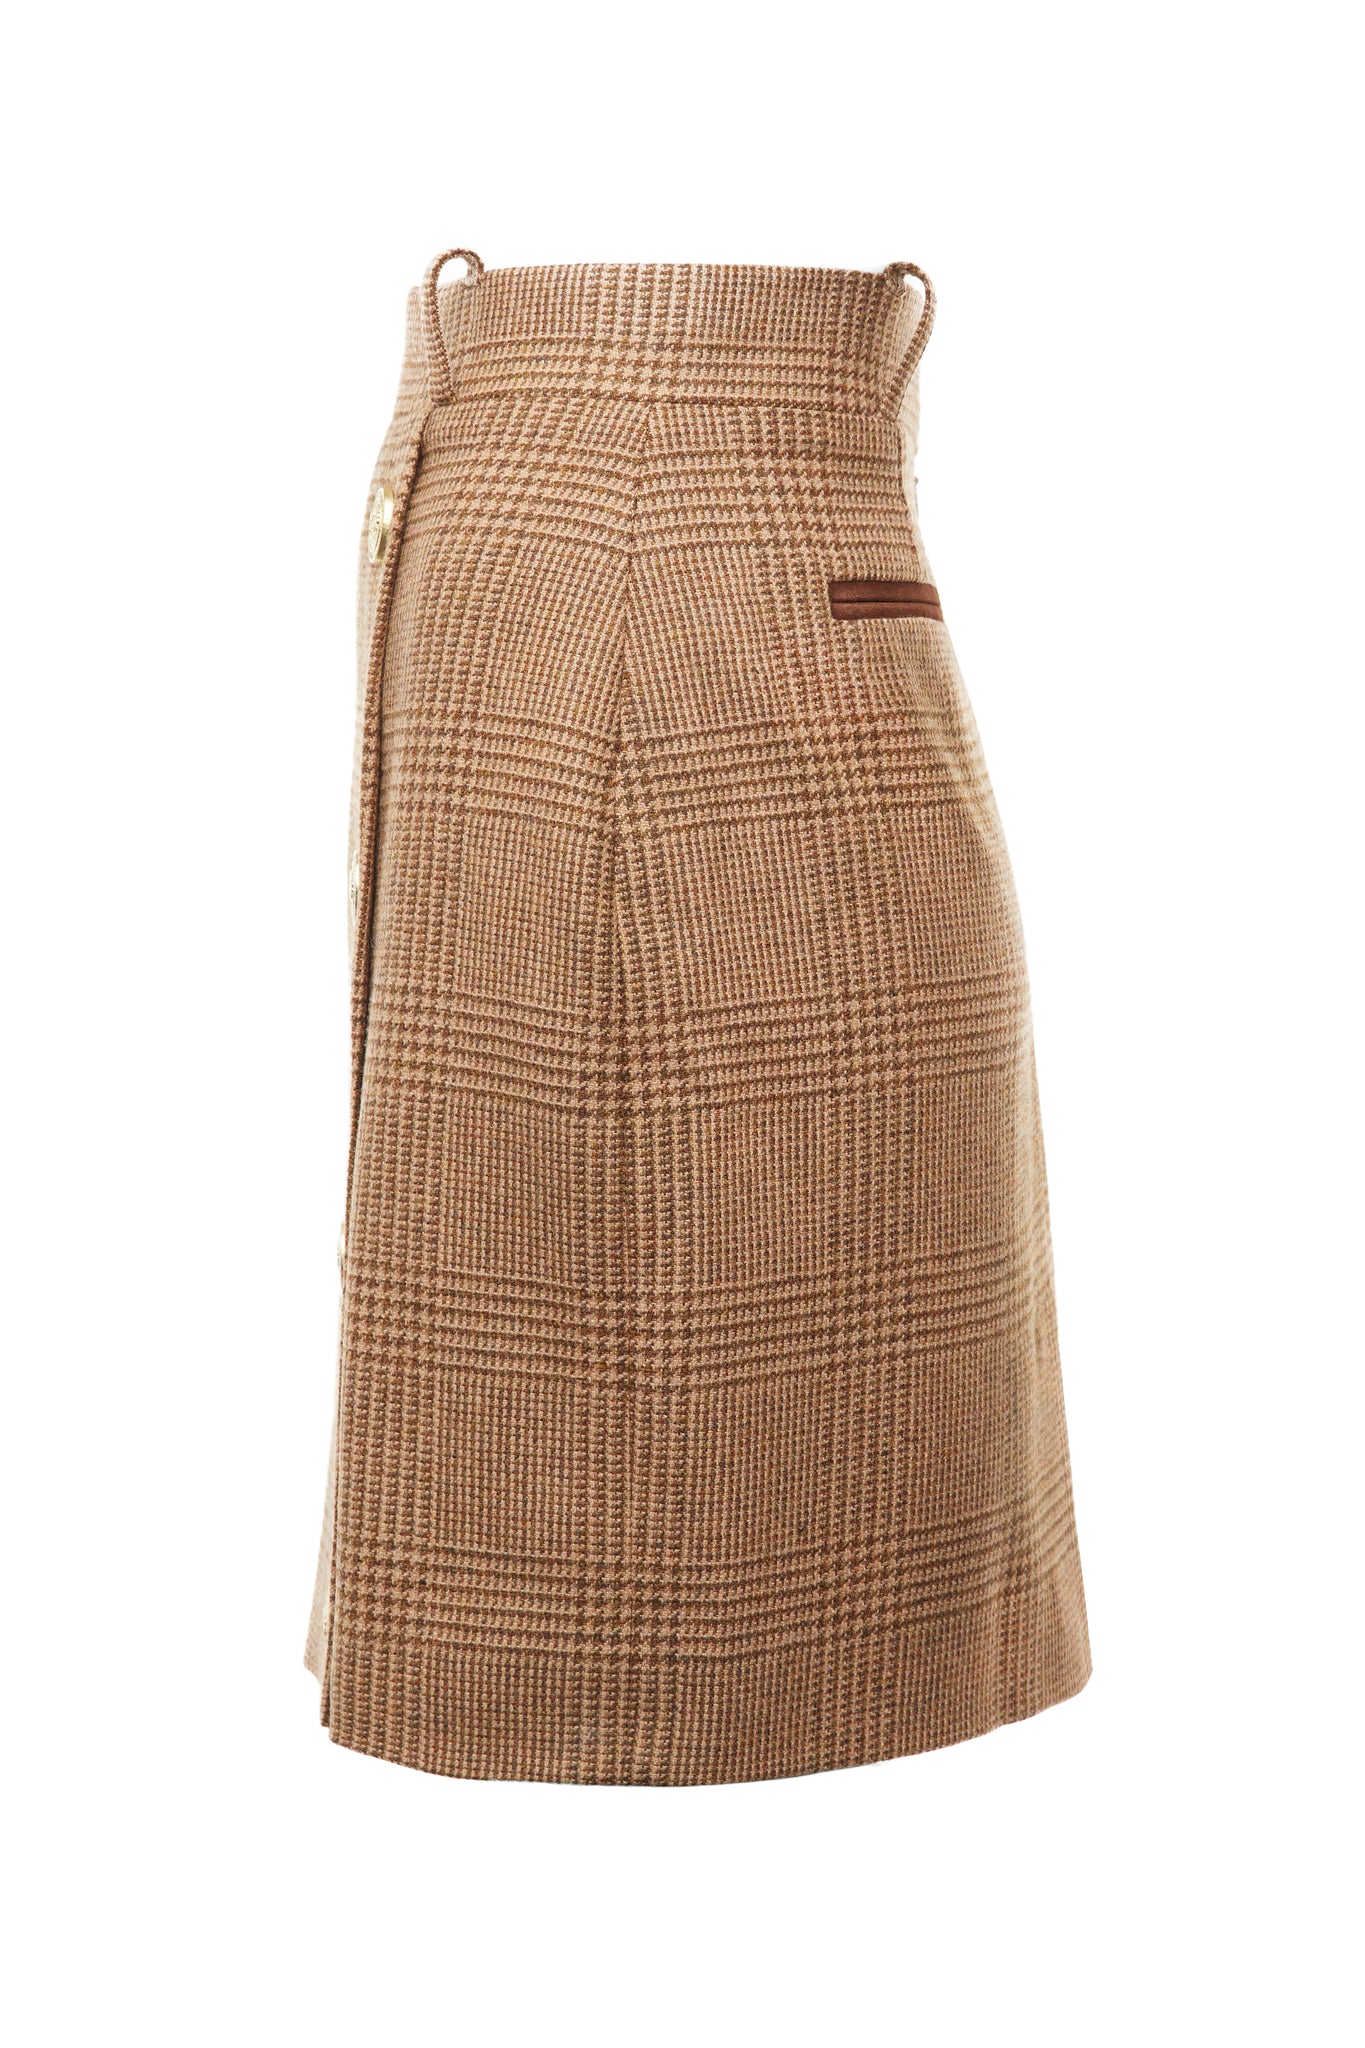 side of womens light brown check wool pencil mini skirt with concealed zip fastening on centre back and gold rivets down front